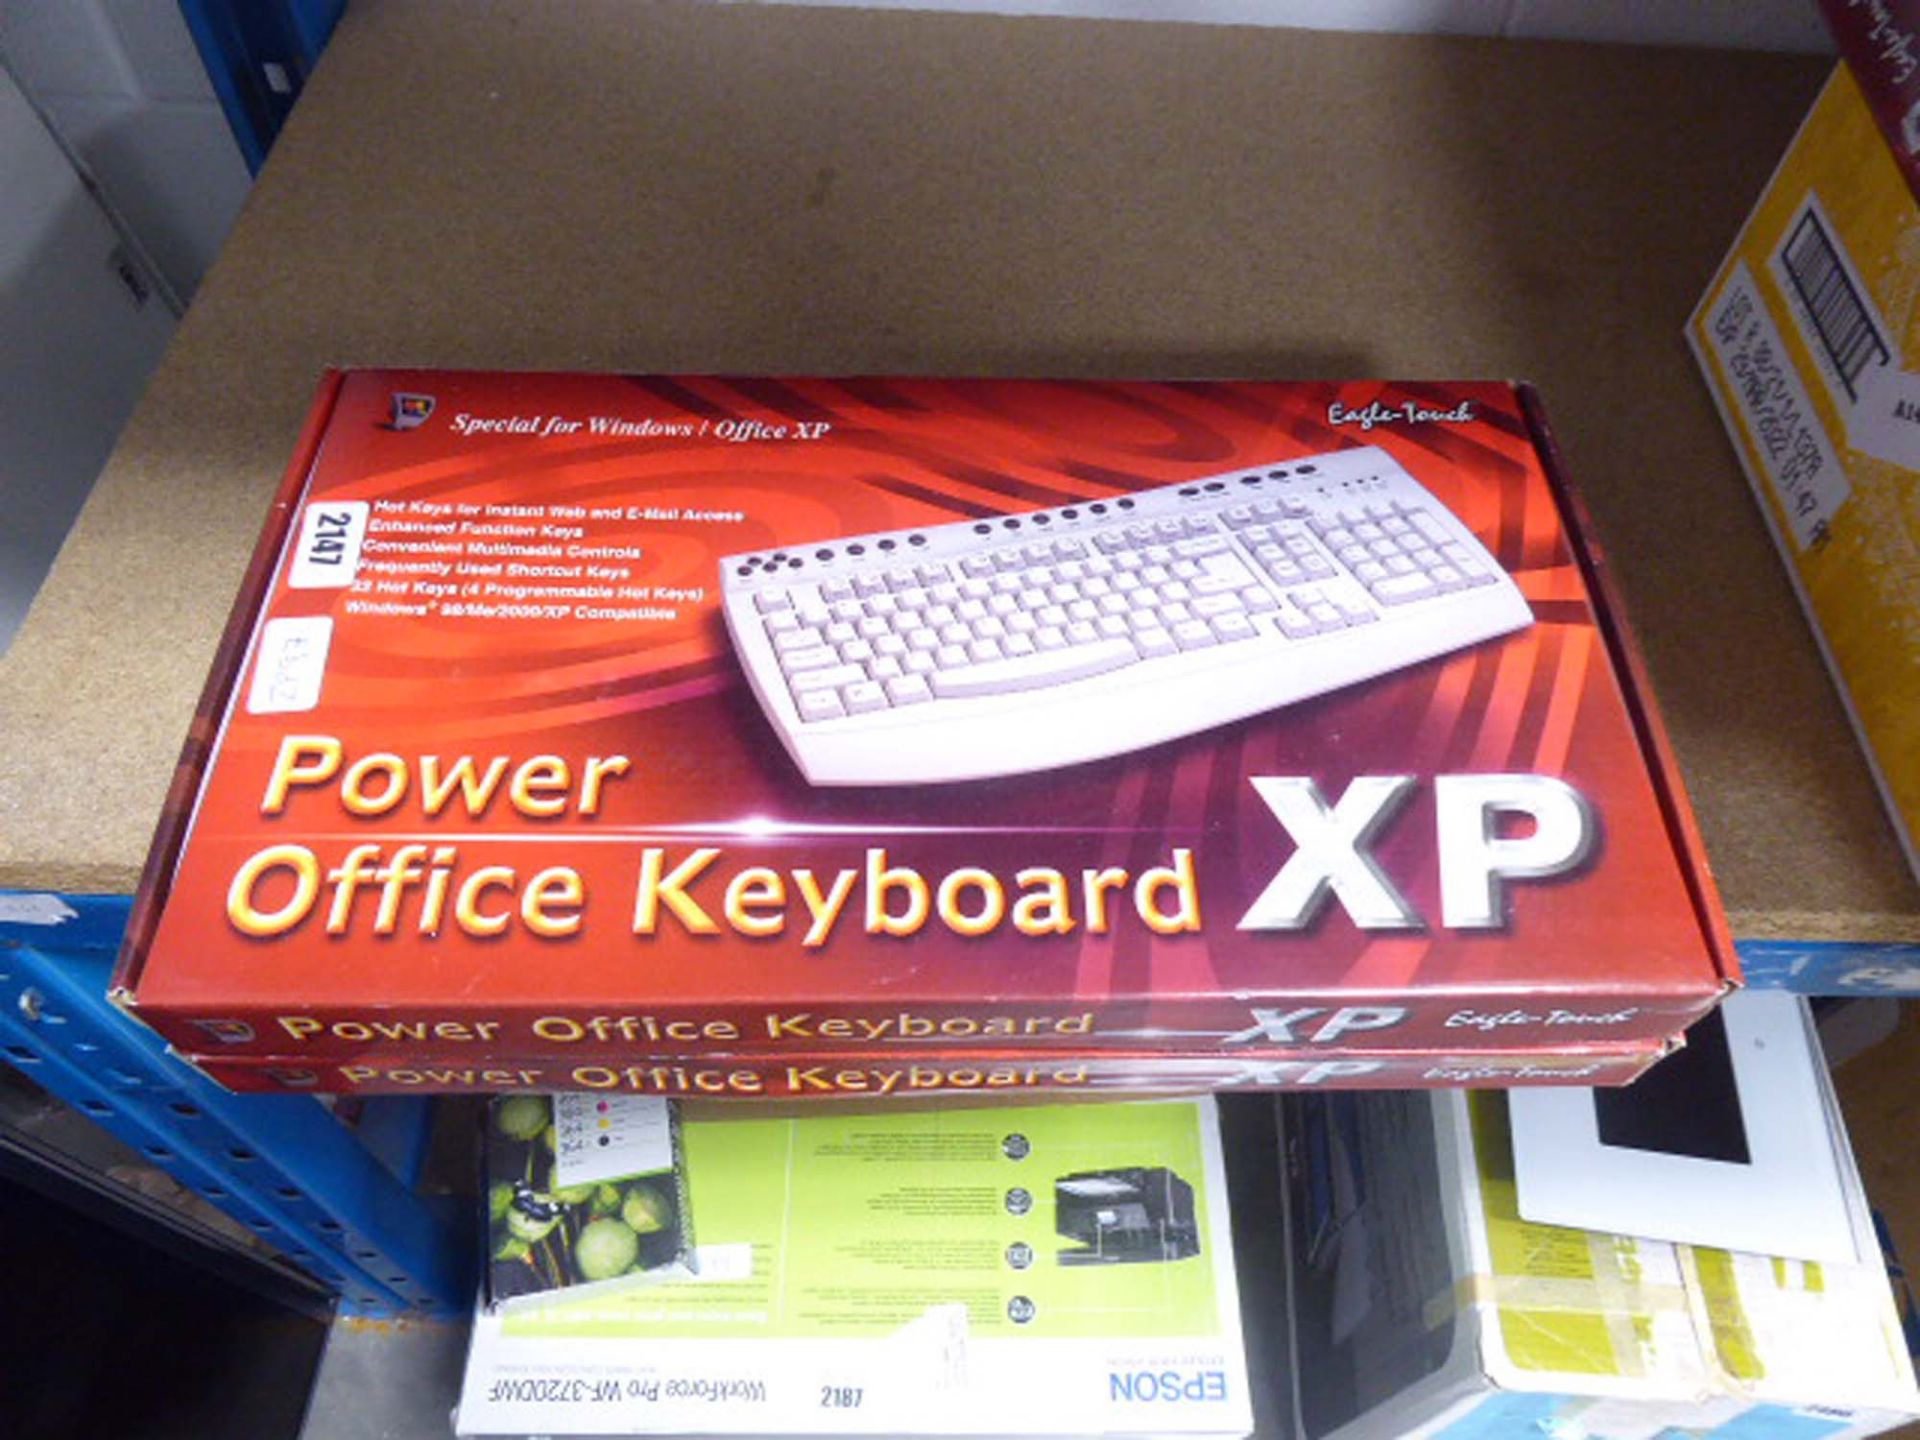 2 XP power office keyboards with boxes